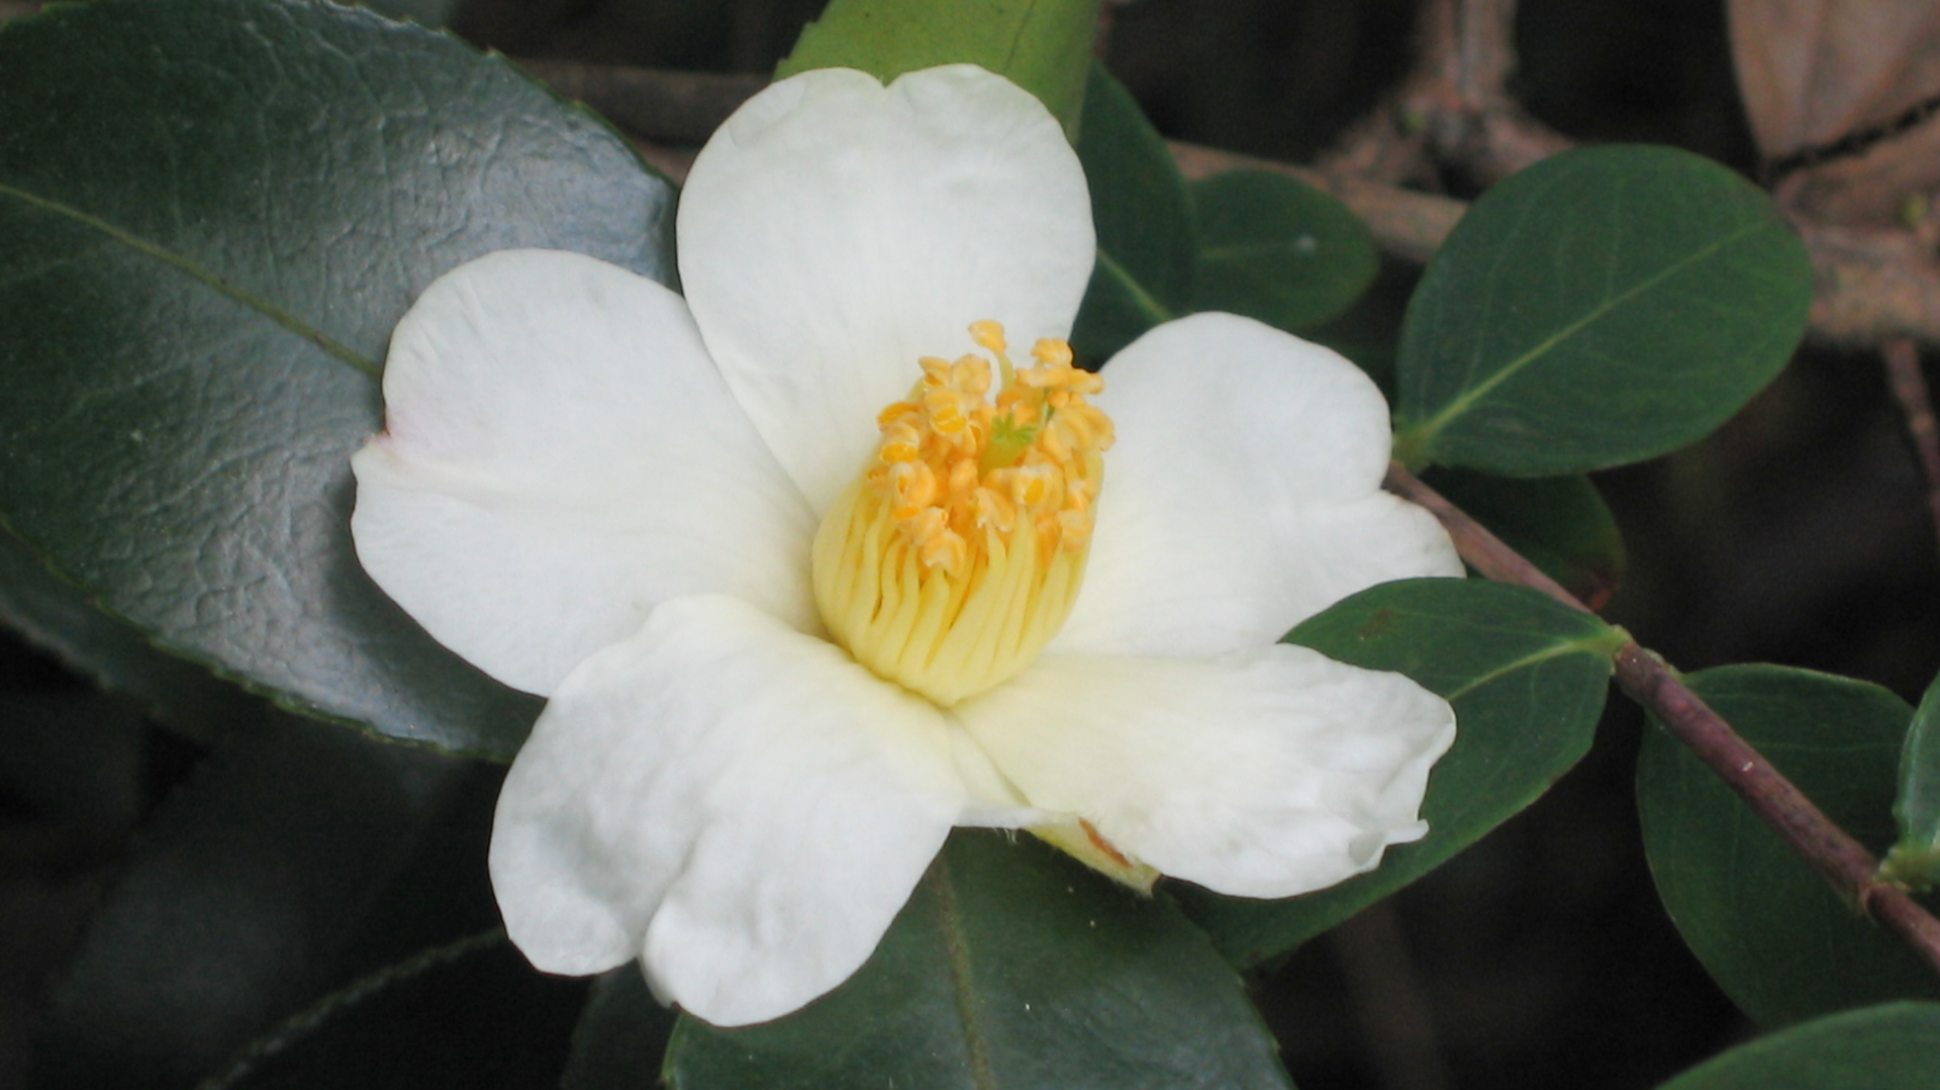 A white flower with a yellow centre